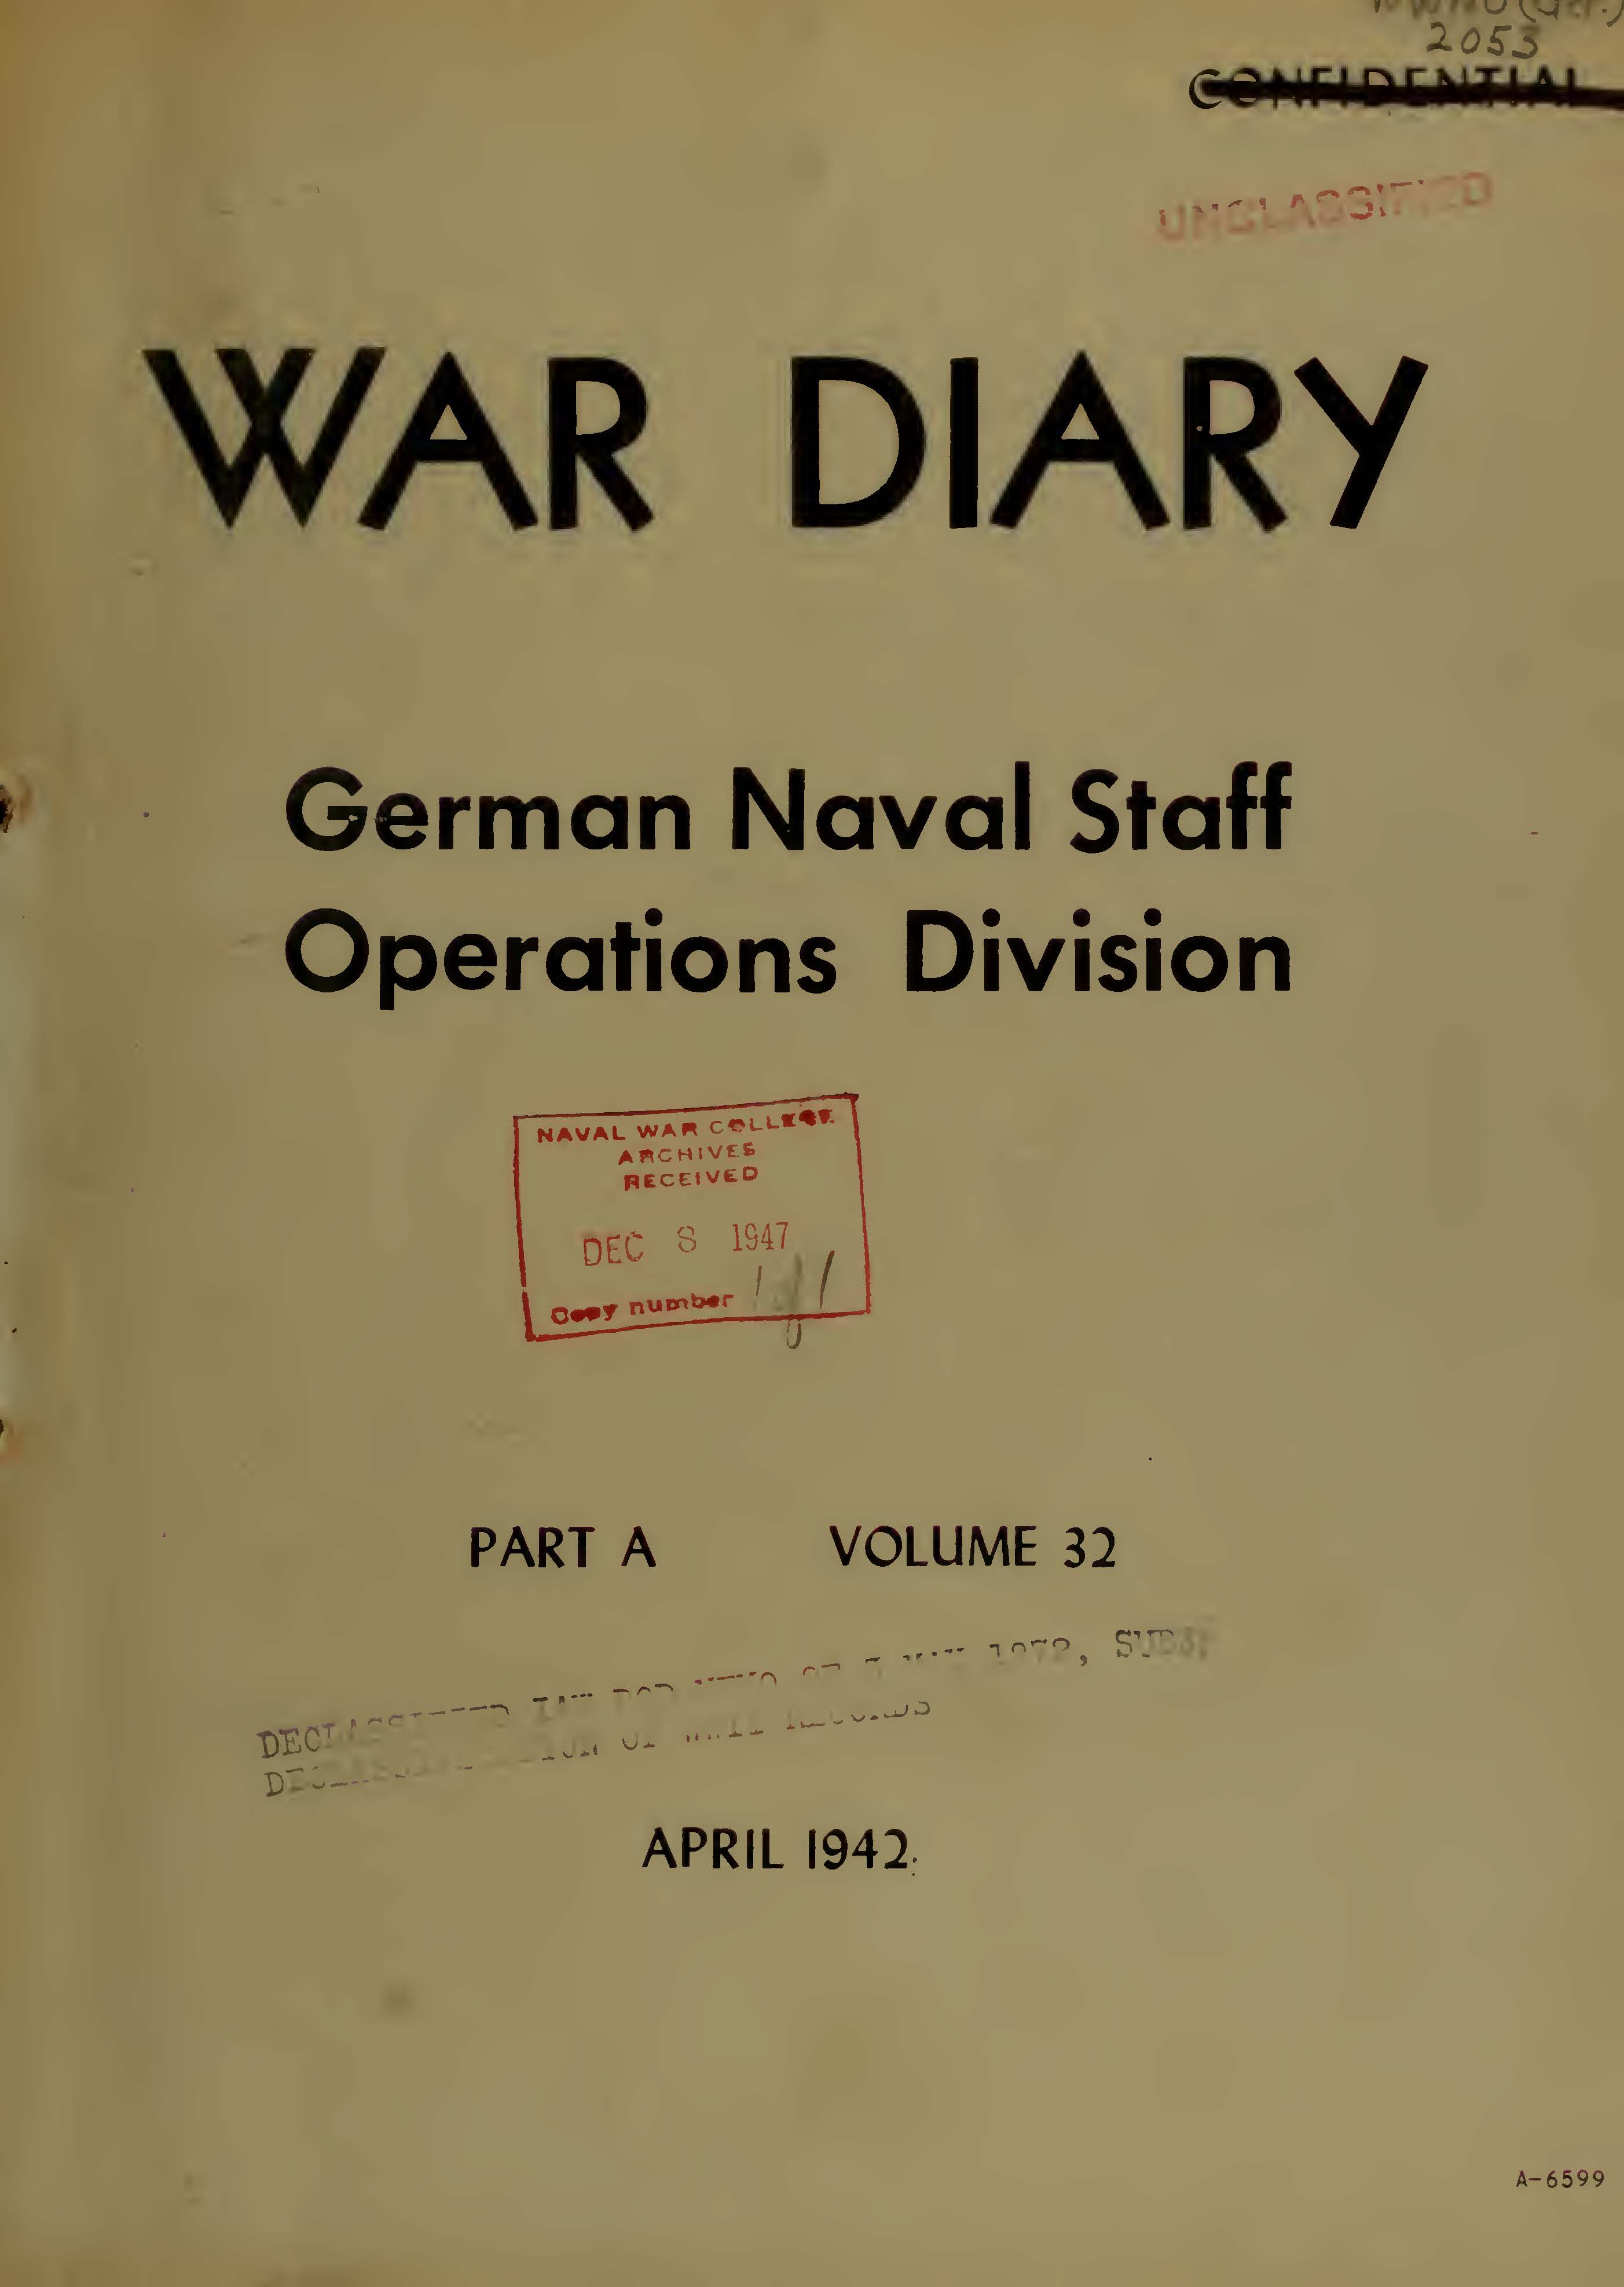 War Diary of German Naval Staff (Operations Division) Part A, Volume 32, April 1942